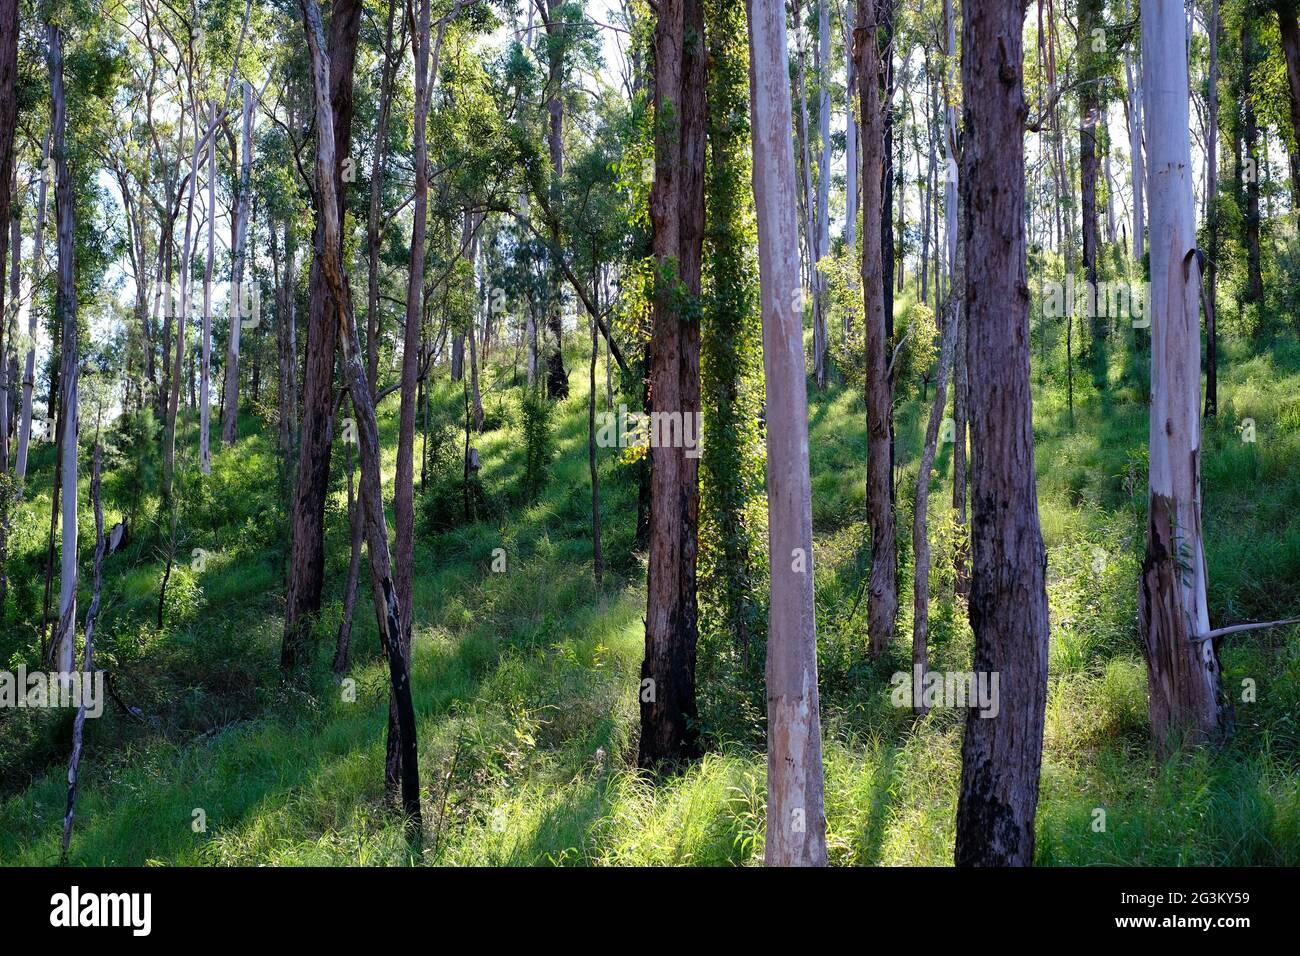 Gum trees, Upper Clarence River, Clarence River Wilderness Lodge, Paddy’s Flat, New South Wales, Australia Stock Photo